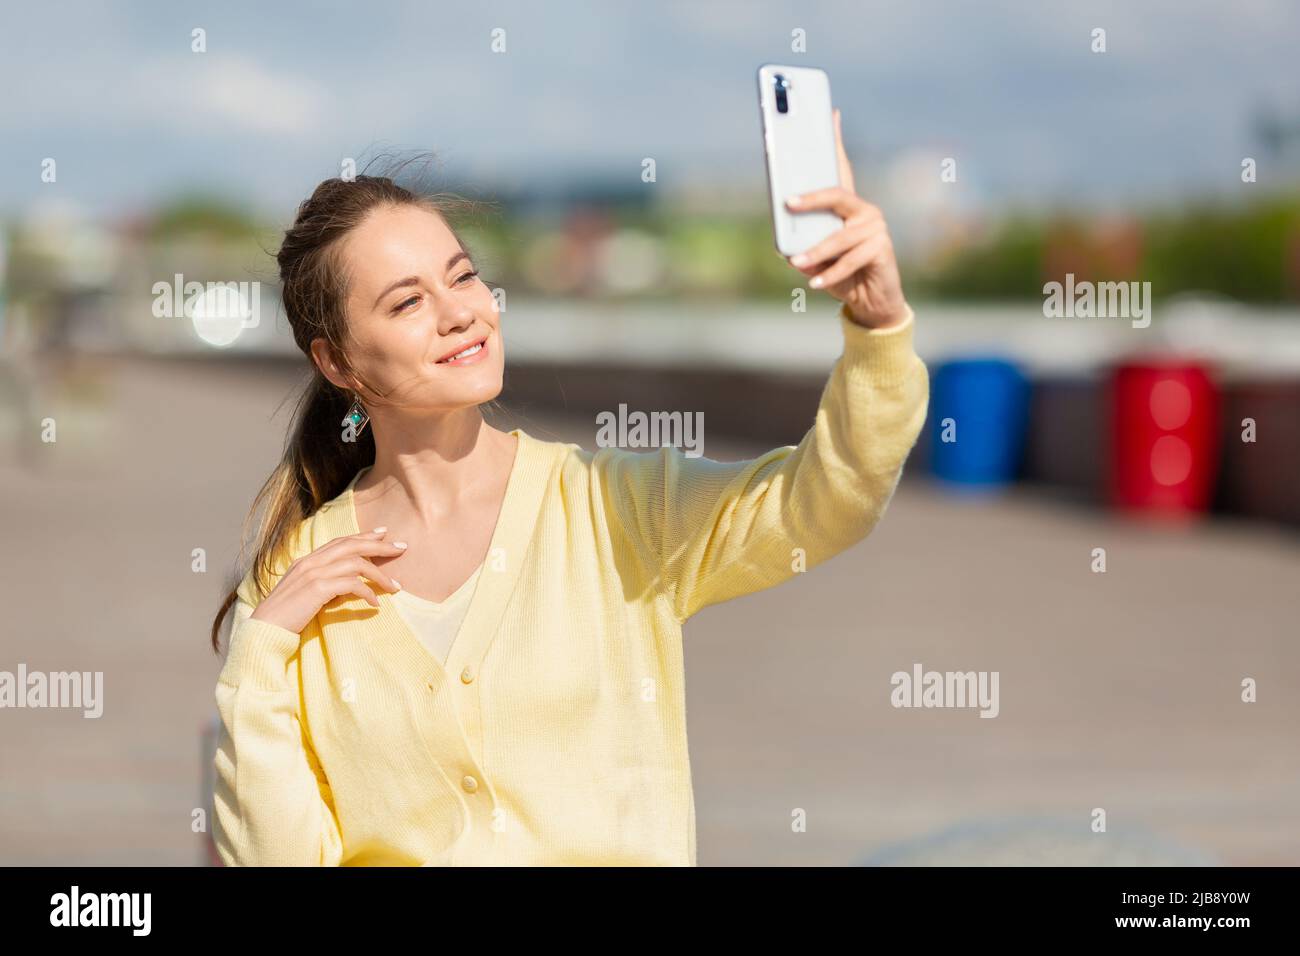 Photo of a 40 years old woman during an online video call. Stock Photo